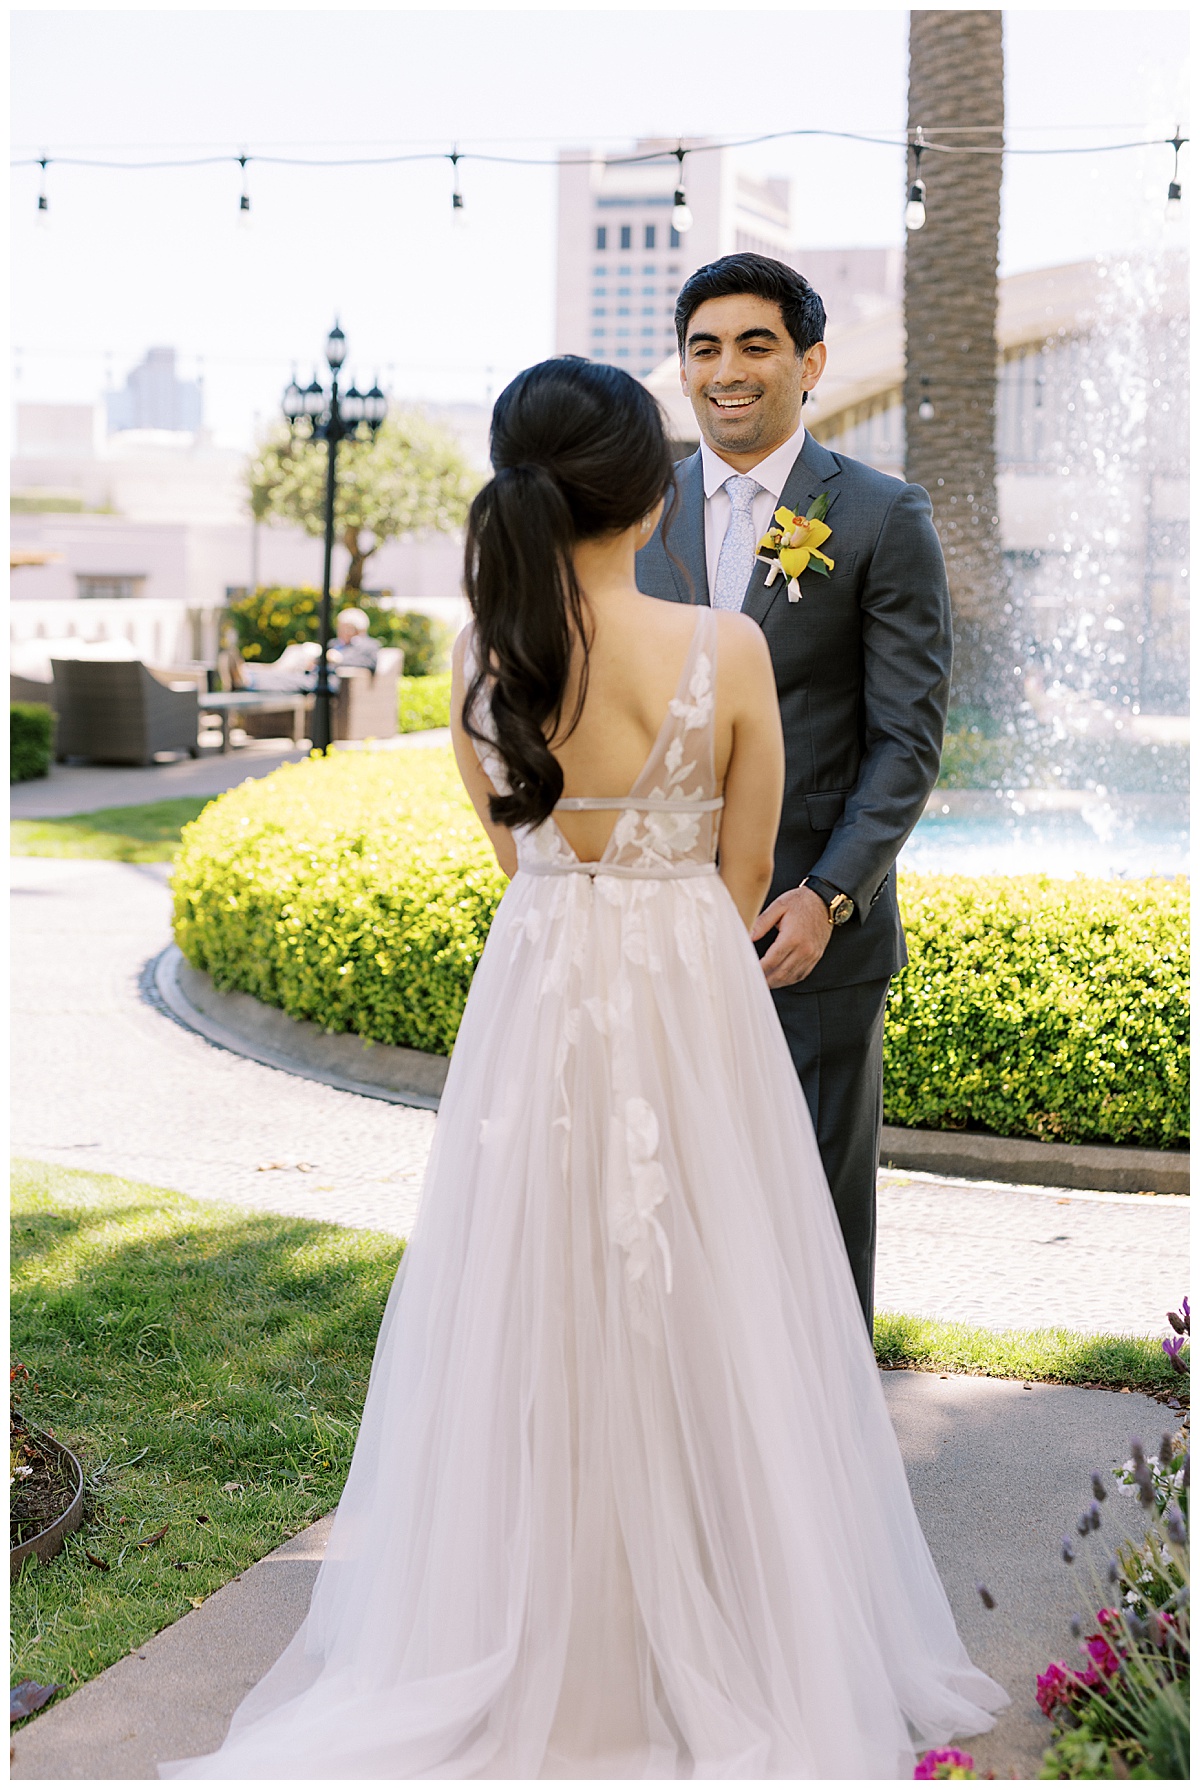 Mary and Ashir's first look